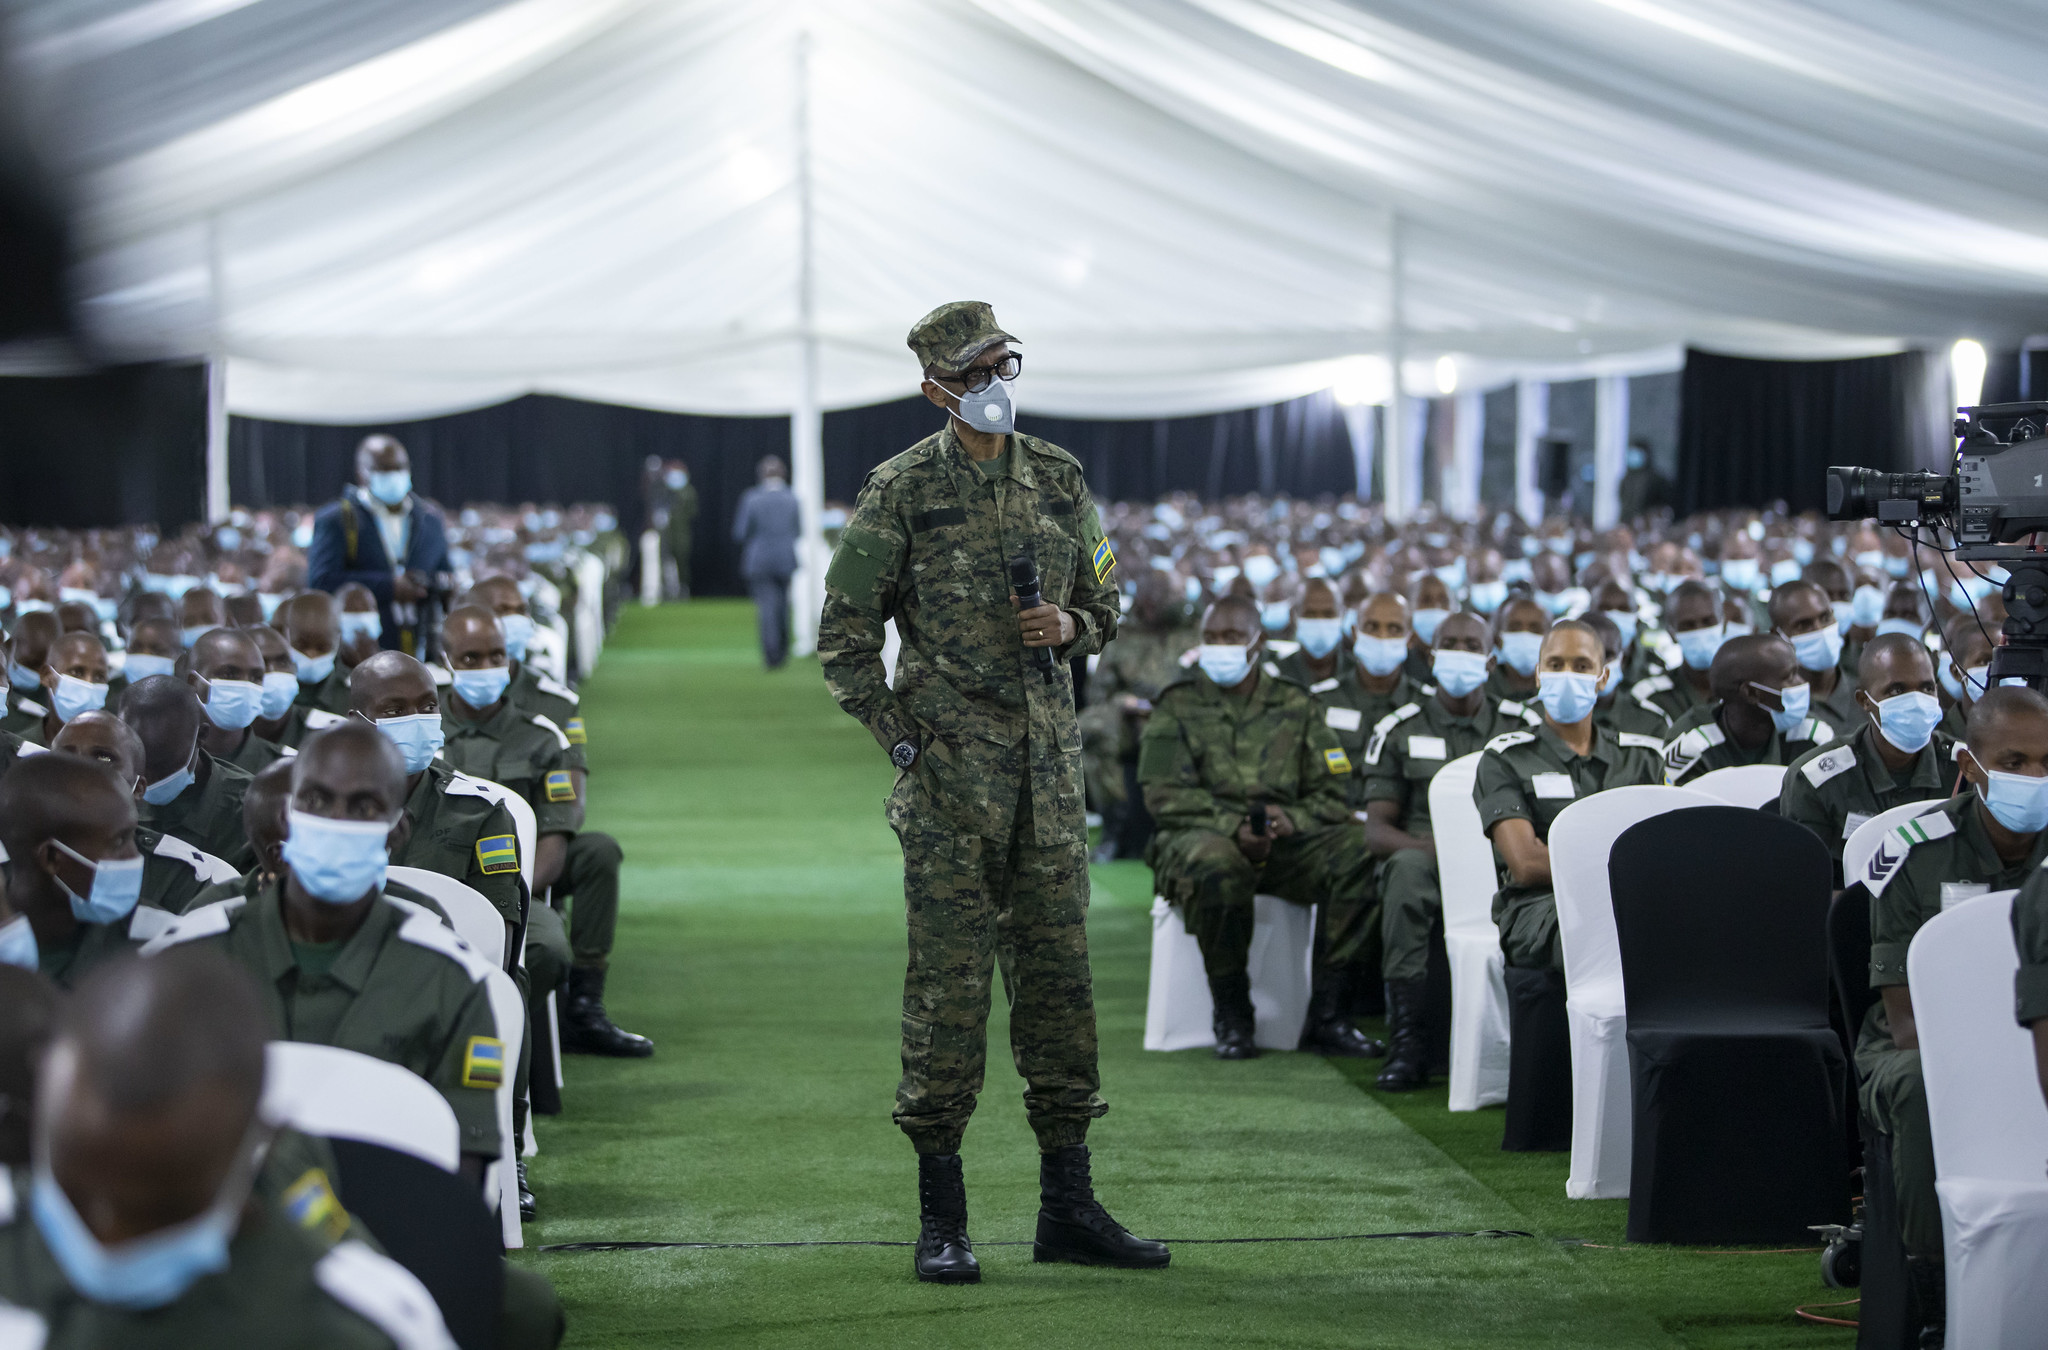 President Paul Kagame, who is also the Commander-in-Chief of Rwanda Defense Force (RDF), briefs Cadet Officers at the Rwanda Military Academy-Gako in Bugesera District, Eastern Province, on Thursday, October 29, 2020. / Photo: Village Urugwiro